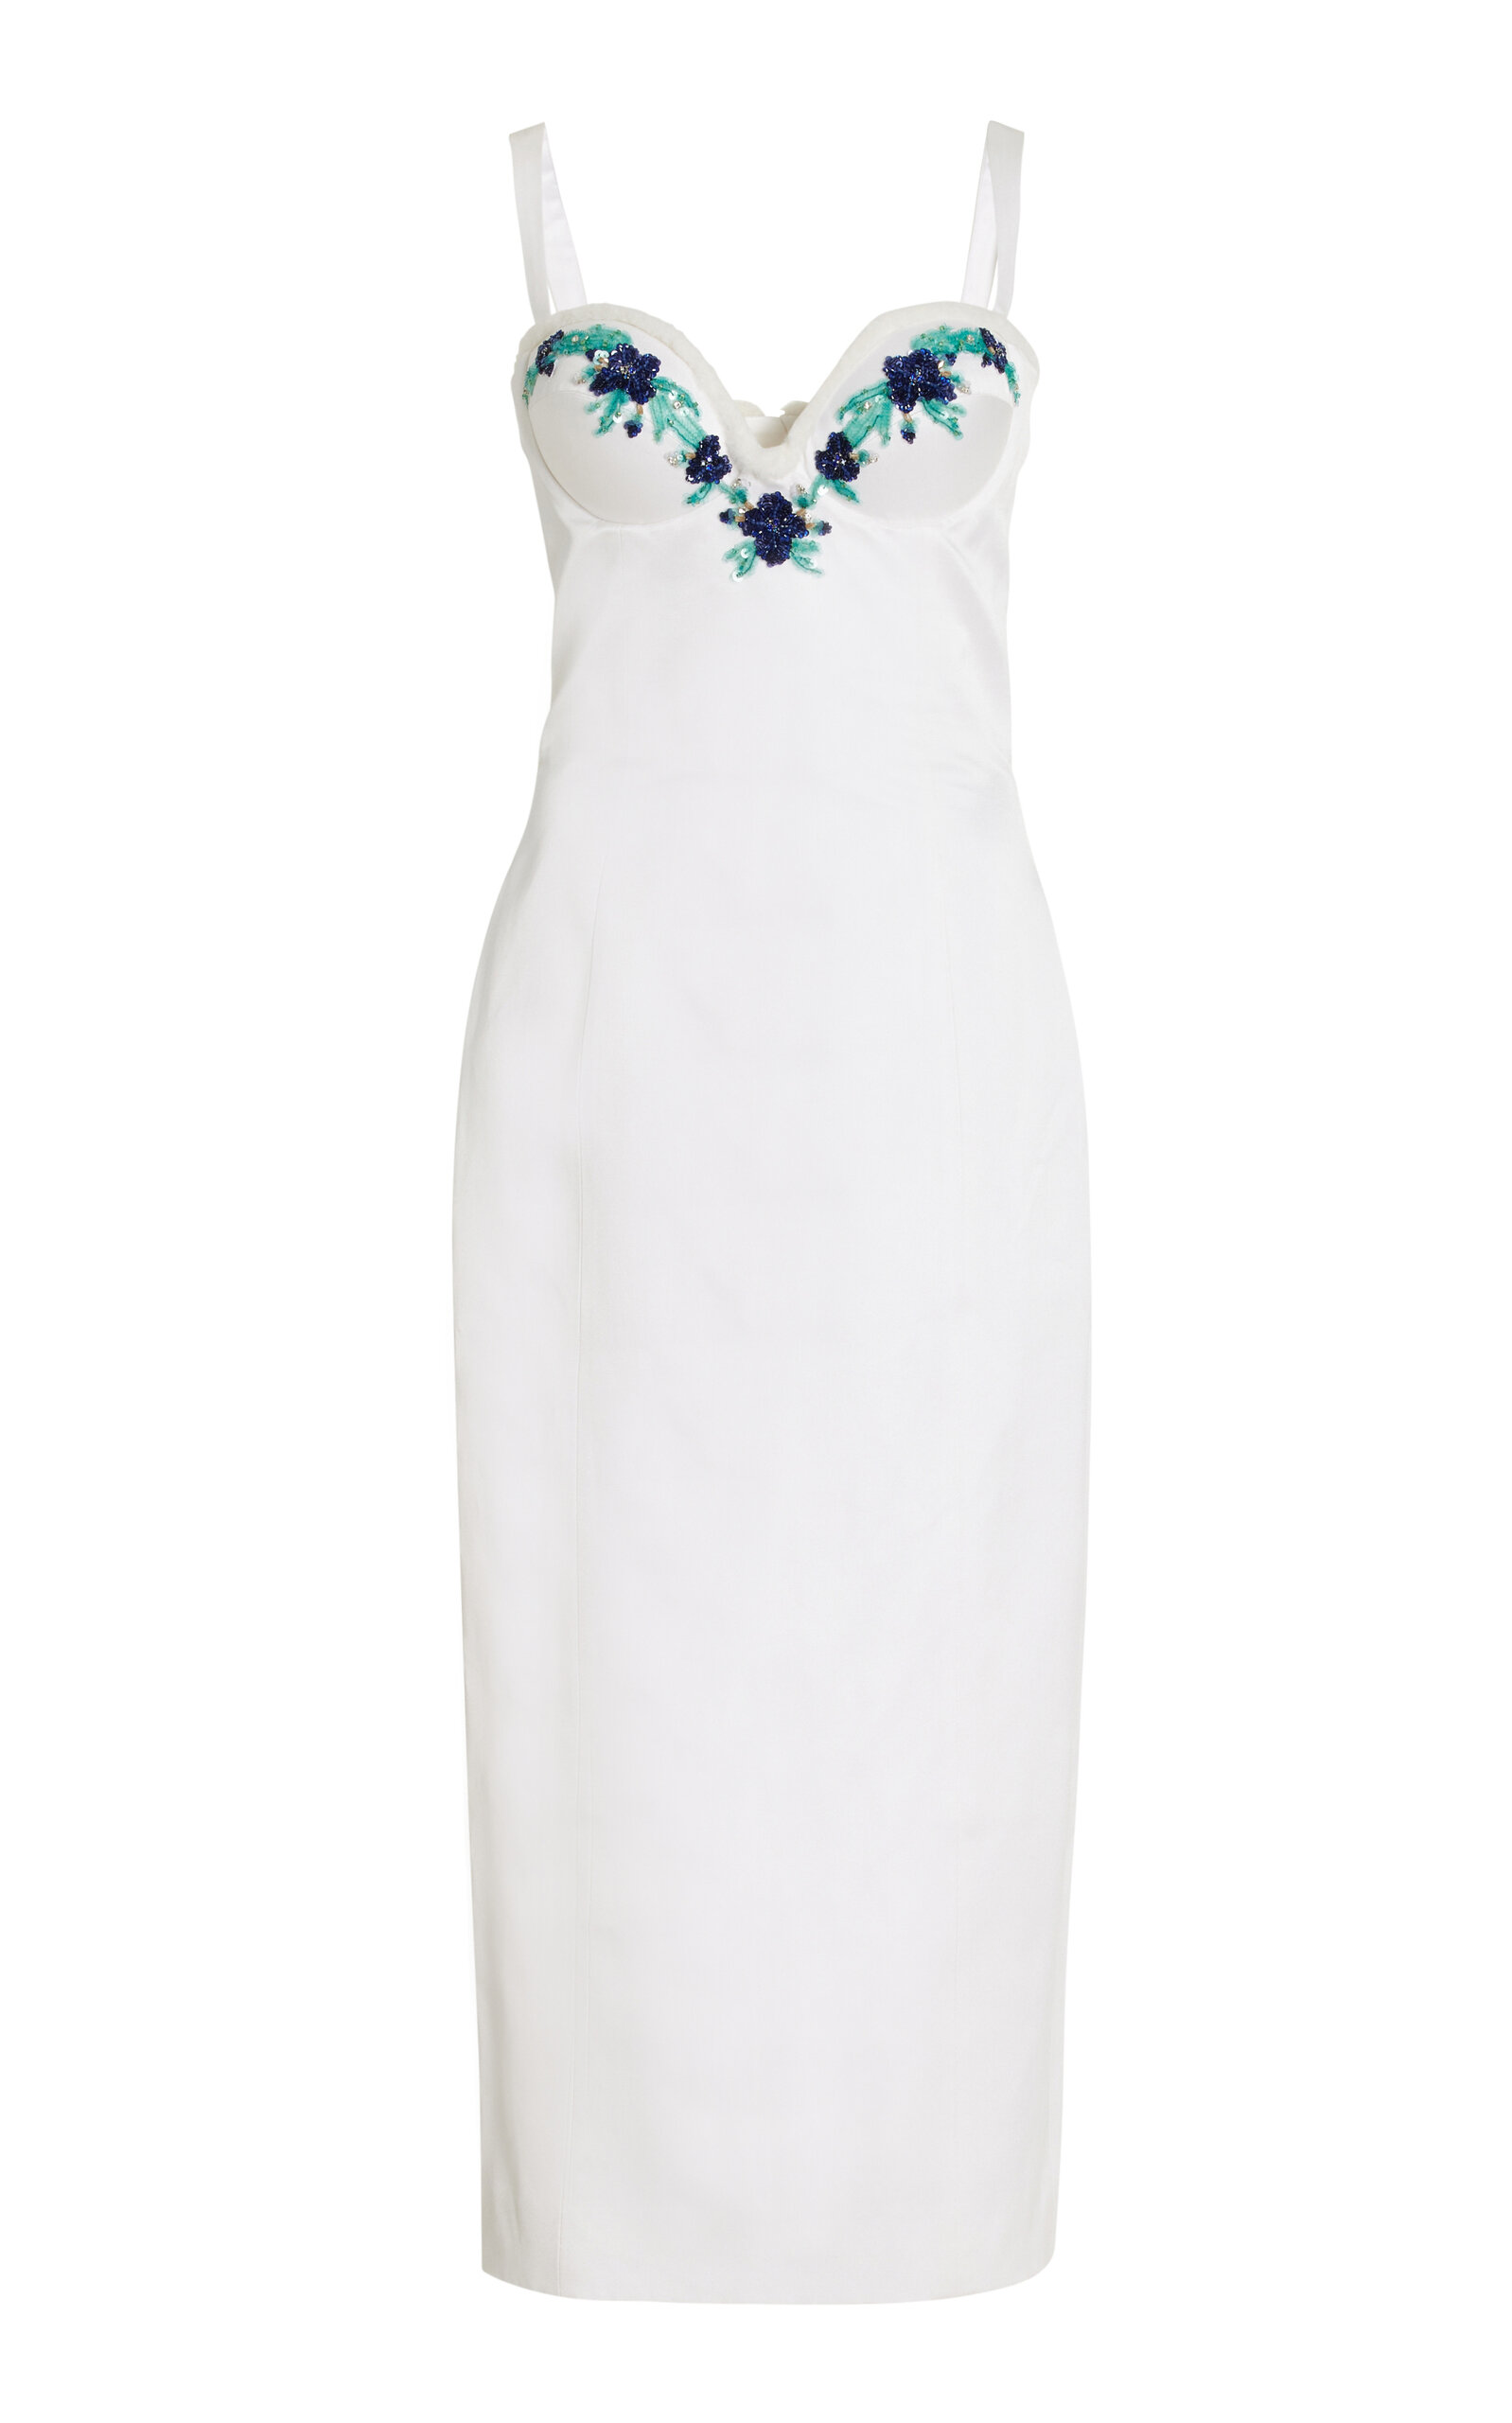 Exclusive Iris Cupped Hourglass Dress